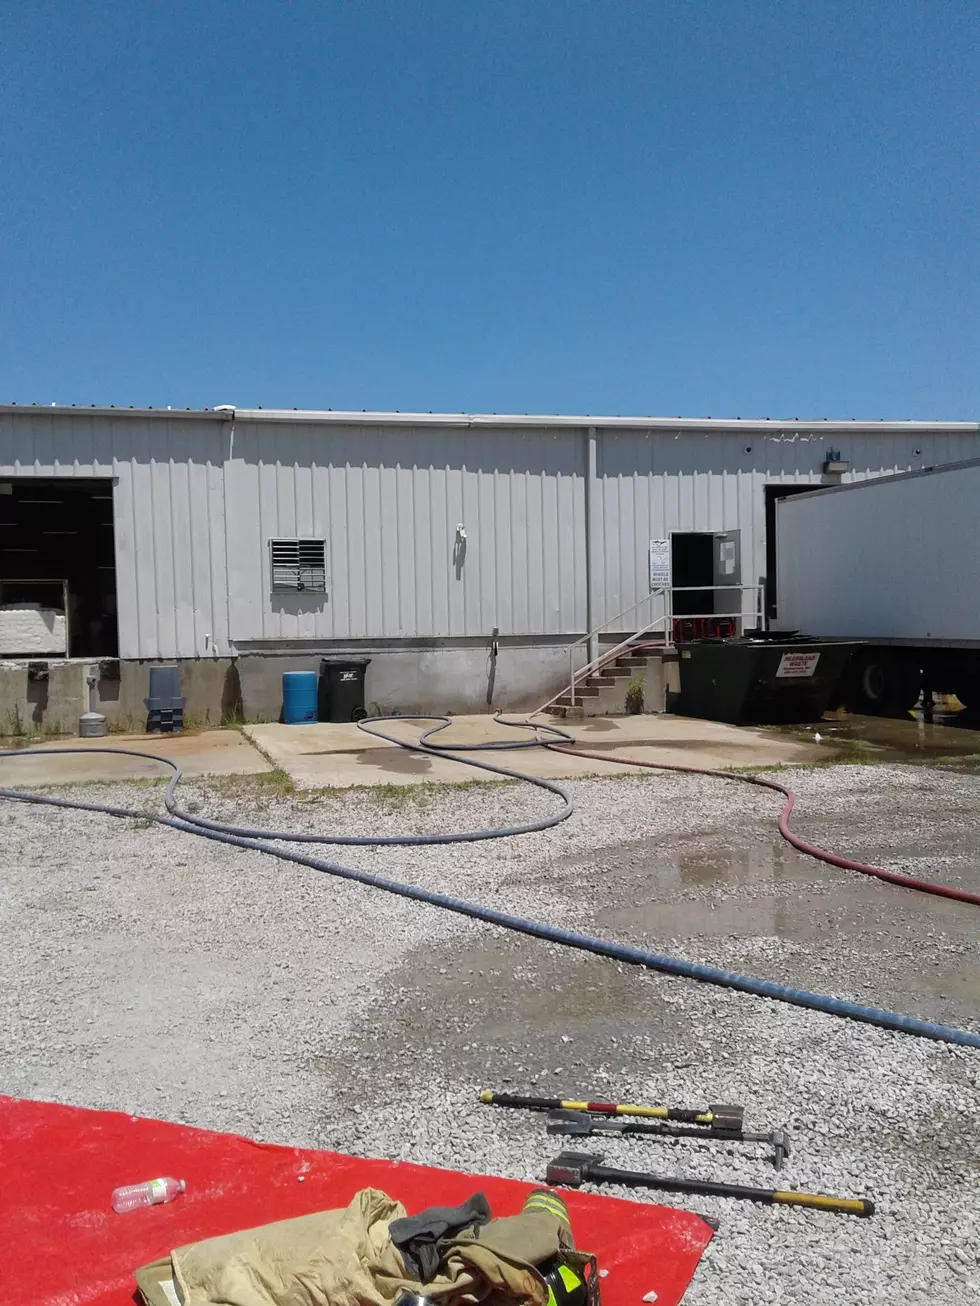 Warrensburg Structure Fire at &#8216;Rise Community Services&#8217; Under Investigation